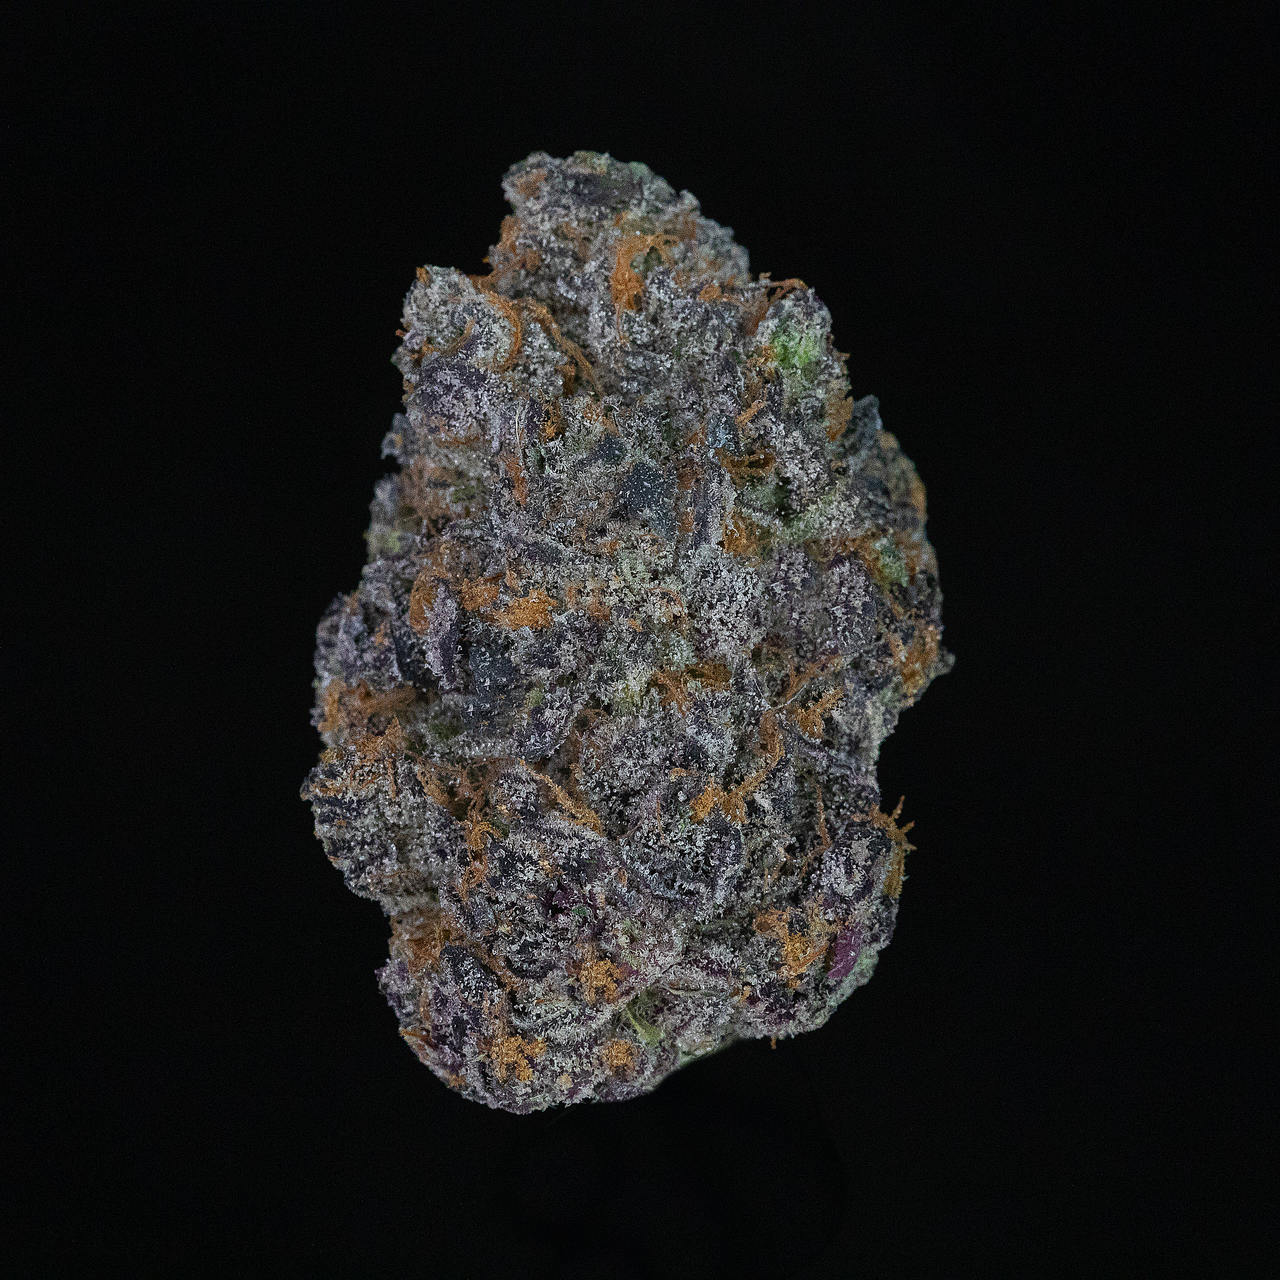 A brightly-colored nug of cannabis flower from the Rainbow Kush strain sits in front of a black background.